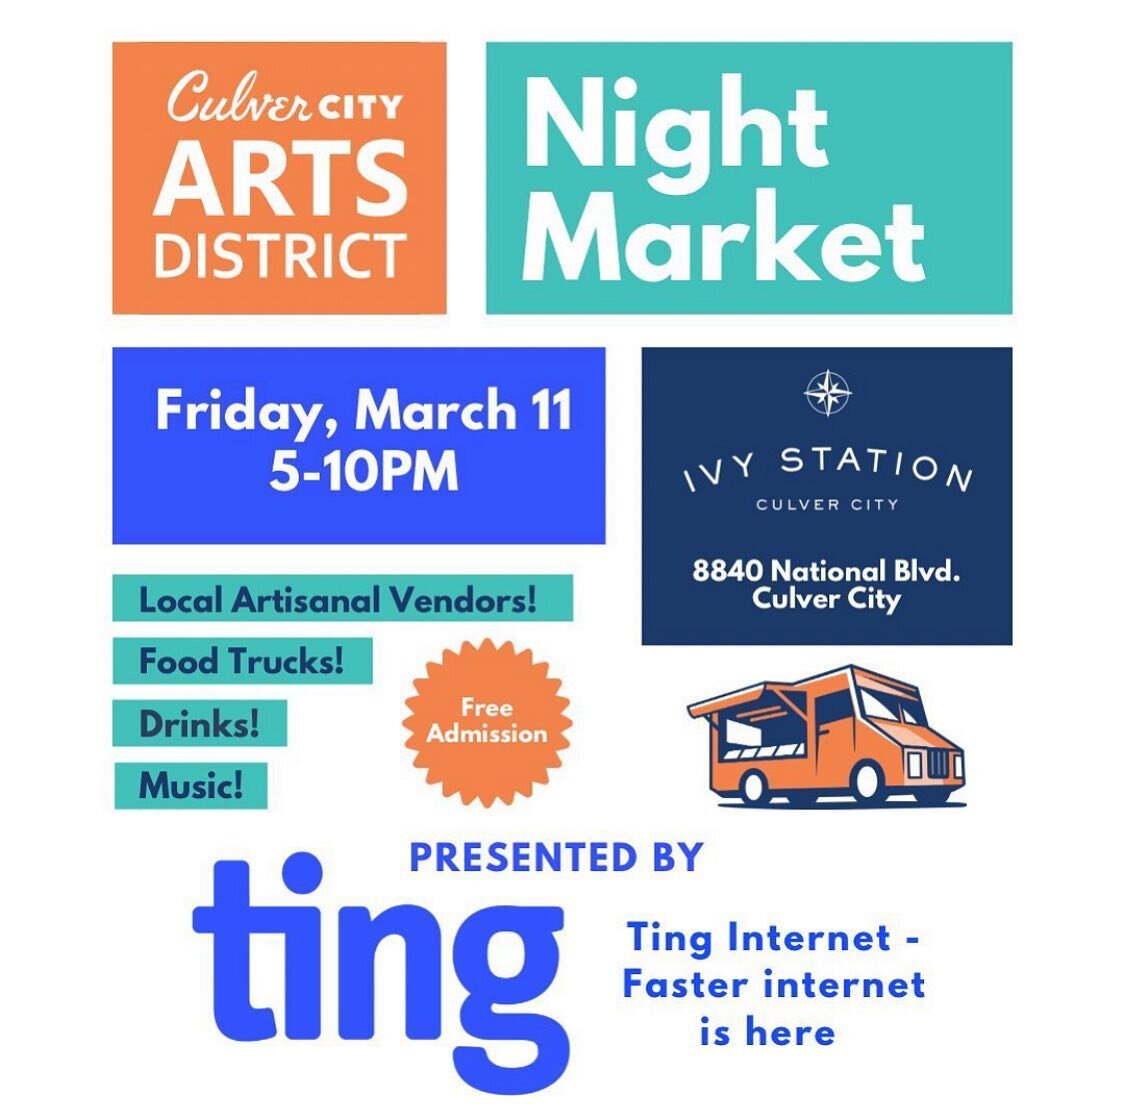 Come out tonight from 5-10pm at @ivystationculvercity for the @culvercityartsdistrict Night Market. Free fun for the whole family. Shopping, food, music, drinks abs more.